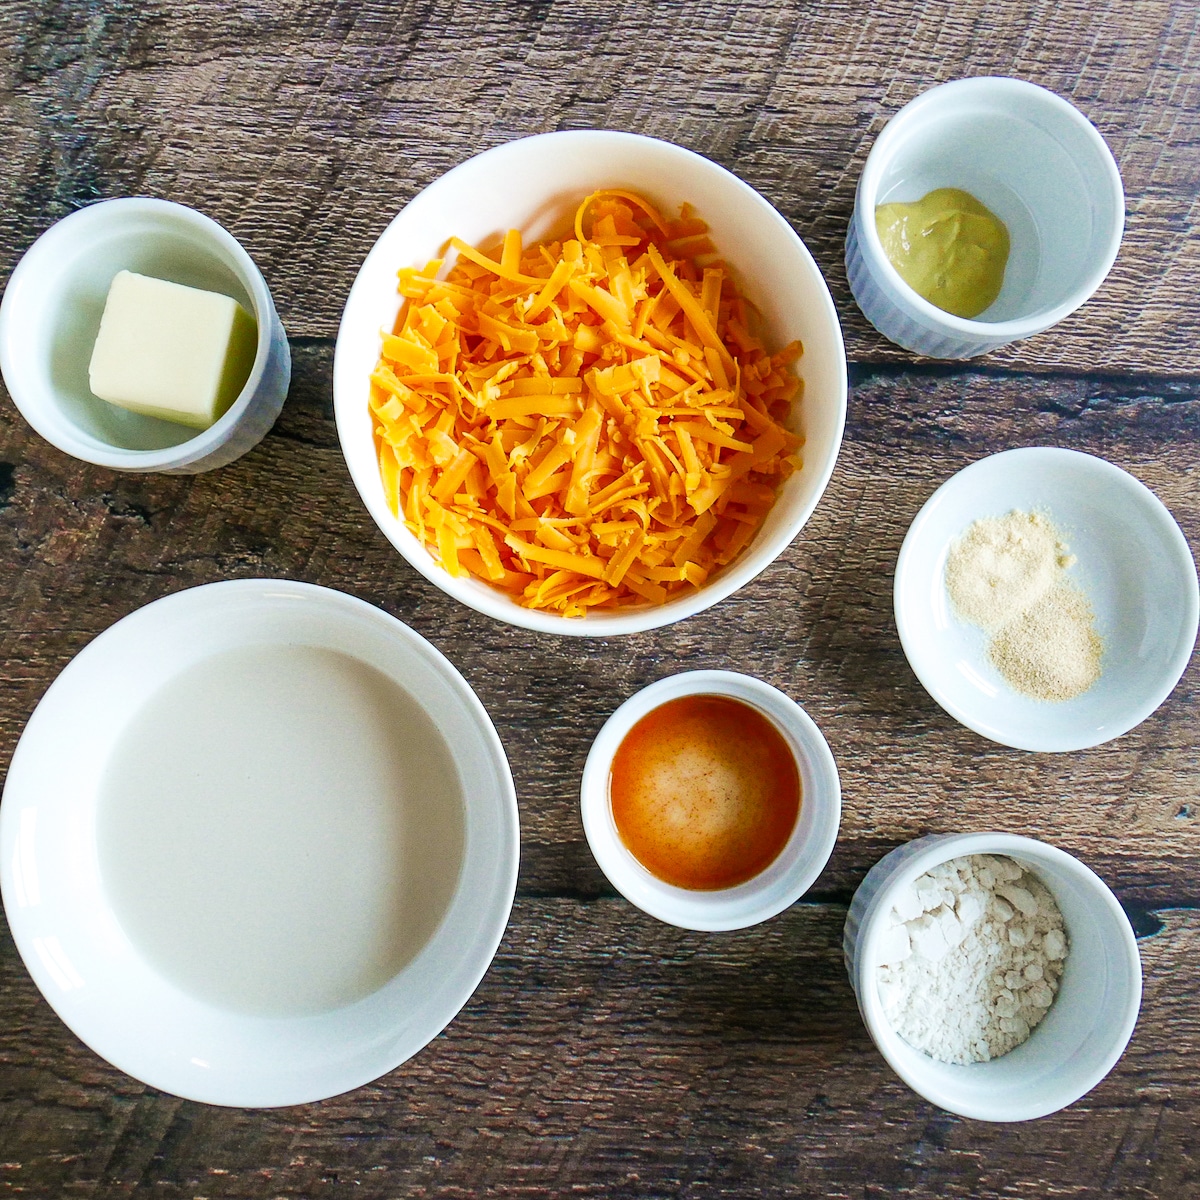 dip ingredients arranged on a table.